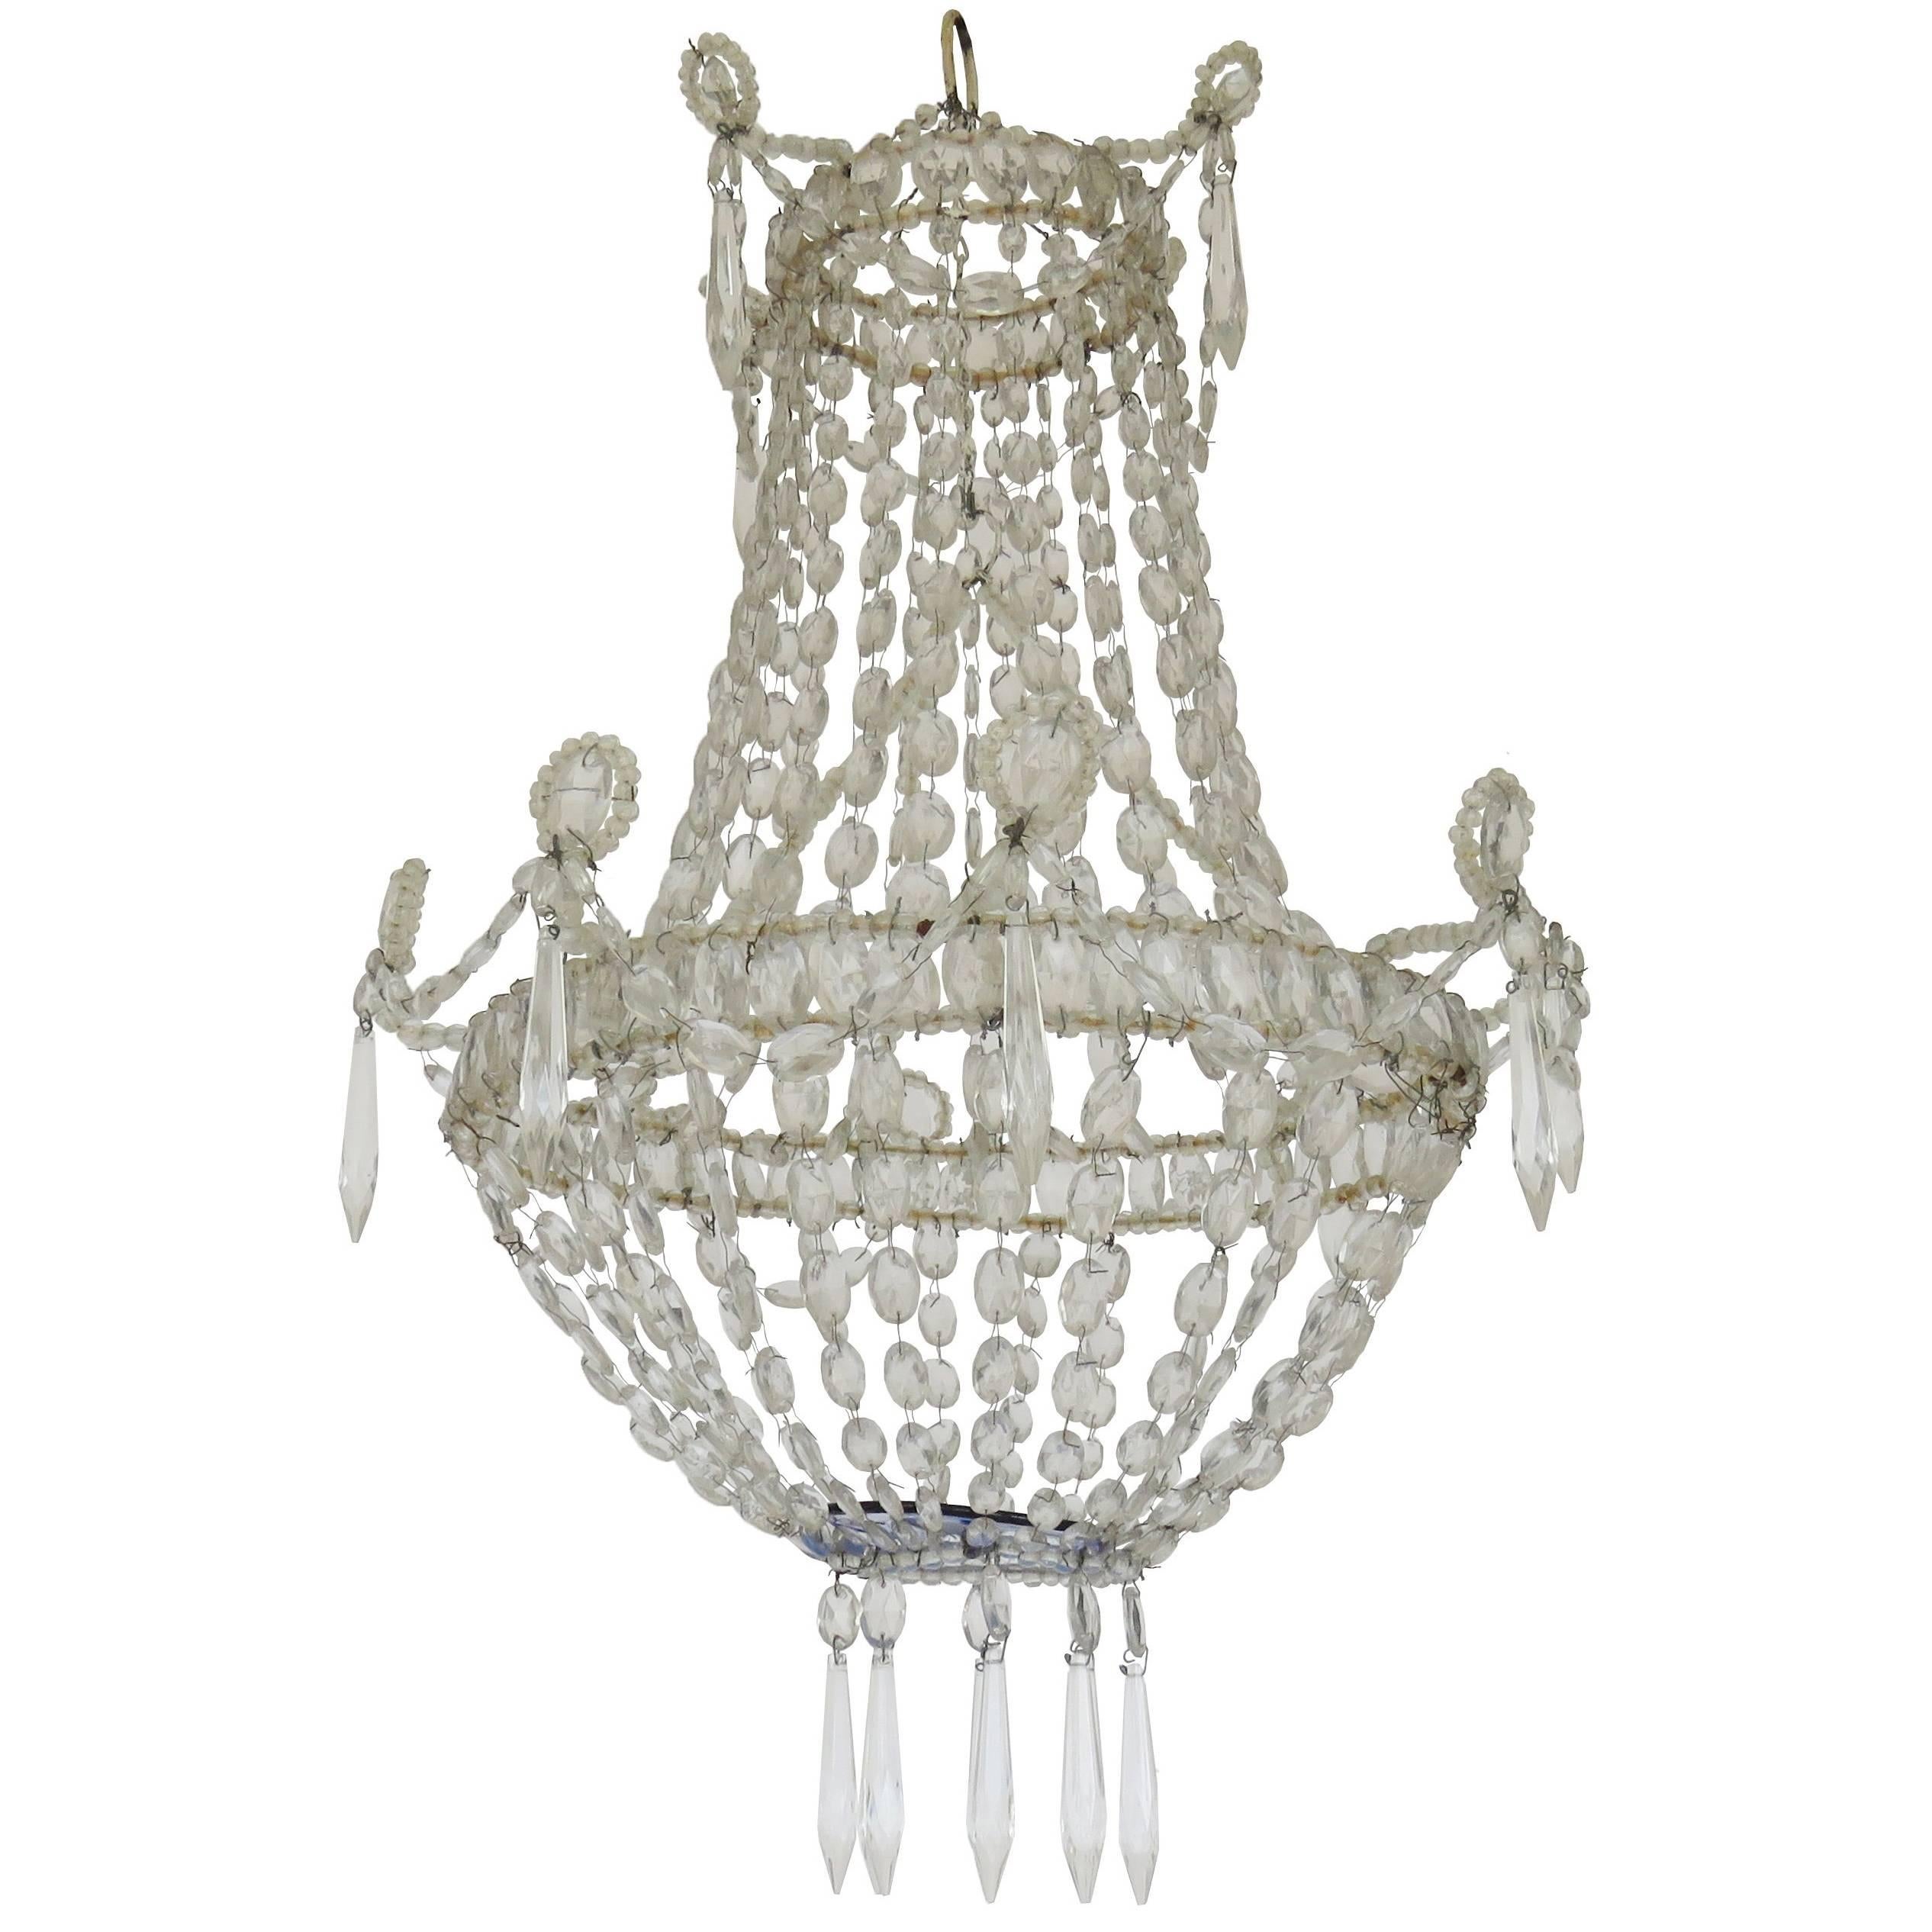 19th Century Neoclassical Crystal Basket Chandelier For Sale